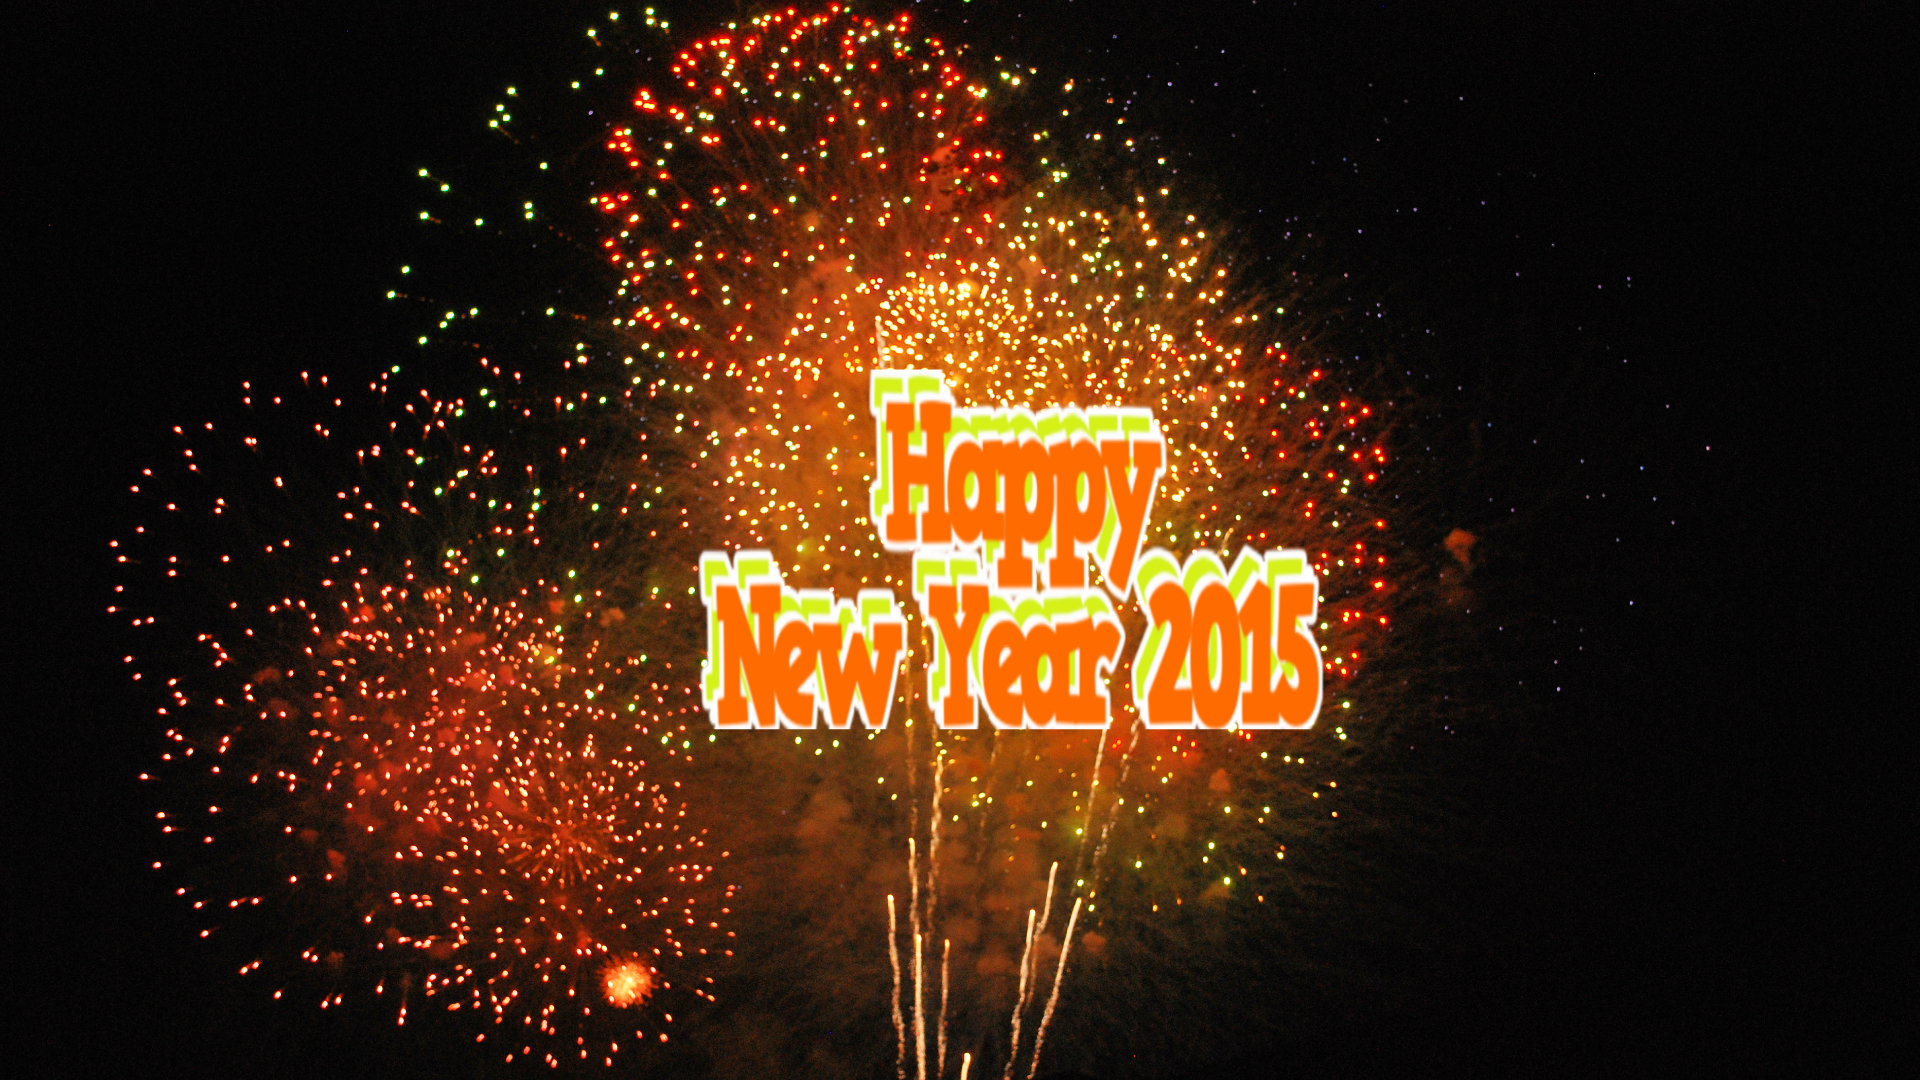 Download full hd New Year 2015 computer background ID:156216 for free